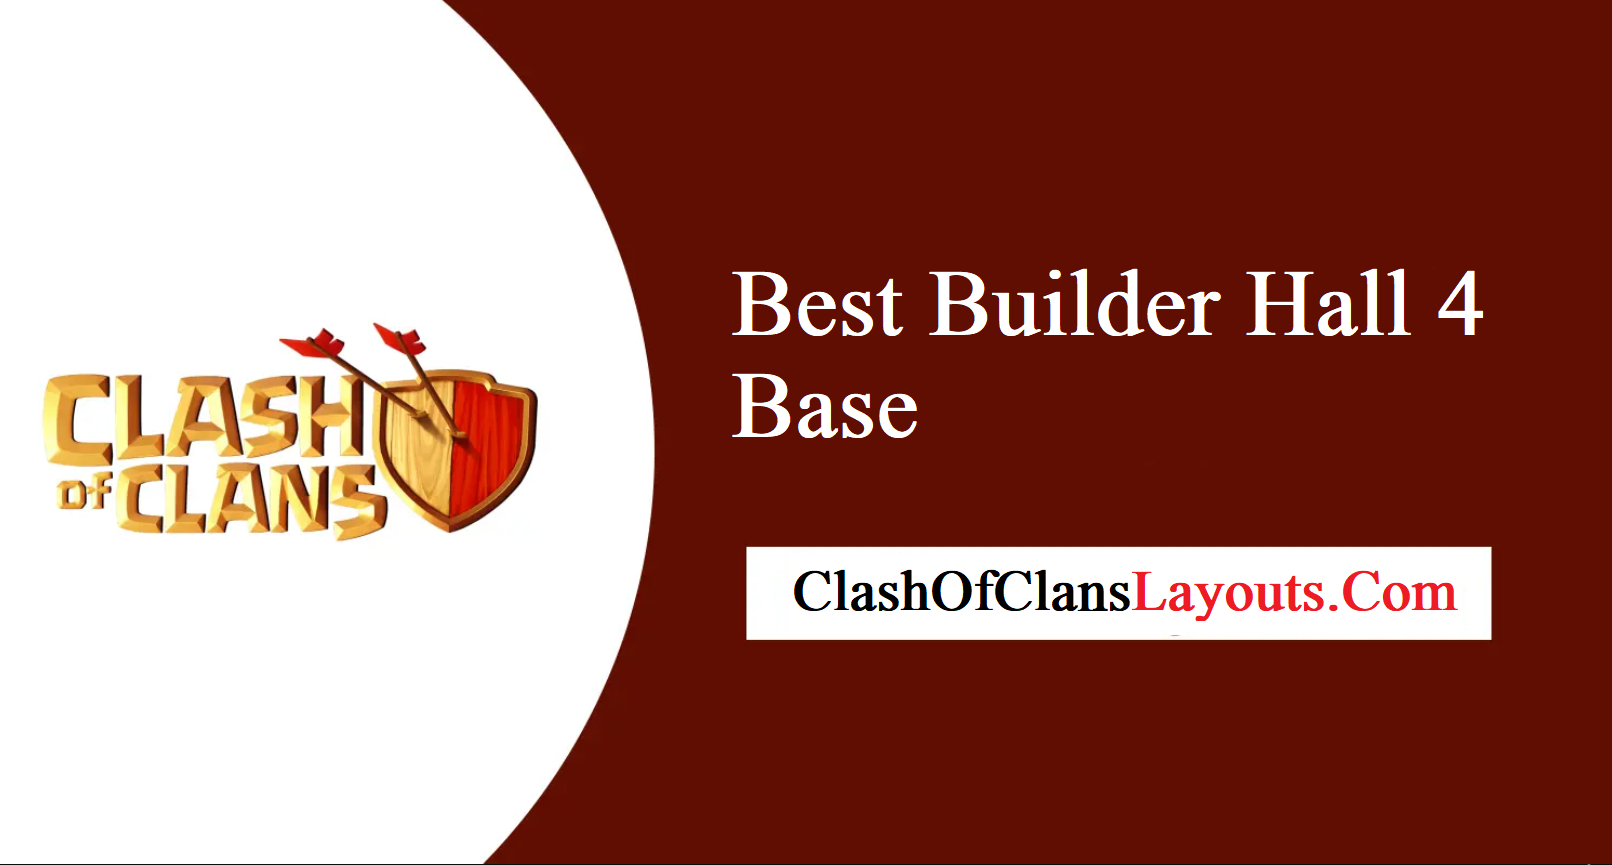 Clash Of Clans Layouts -